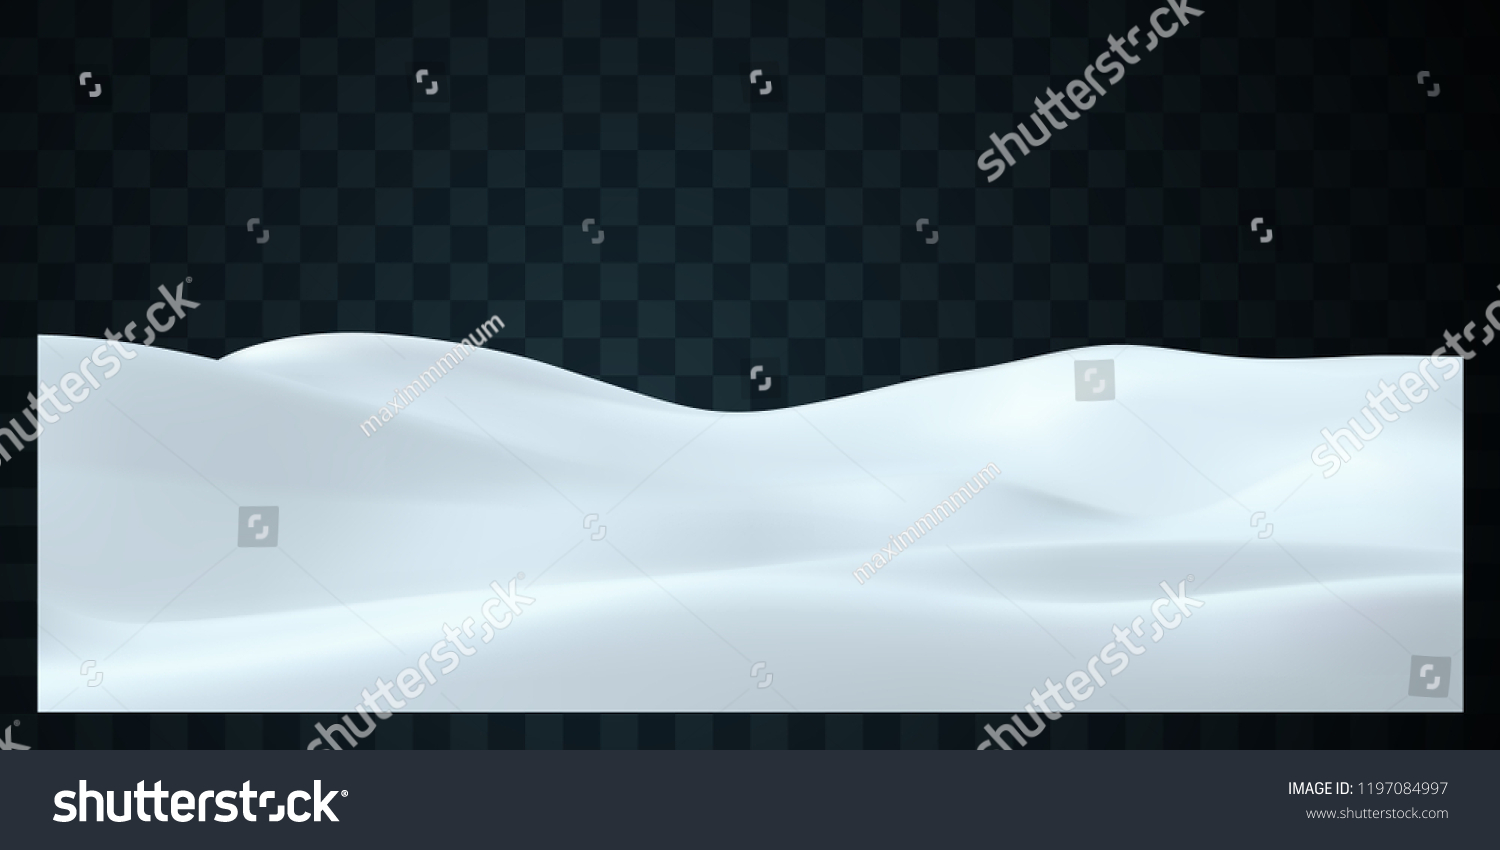 Snowy landscape isolated on dark transparent background. Vector illustration of winter decoration. Snow background. Snowdrift. Game art concept #1197084997